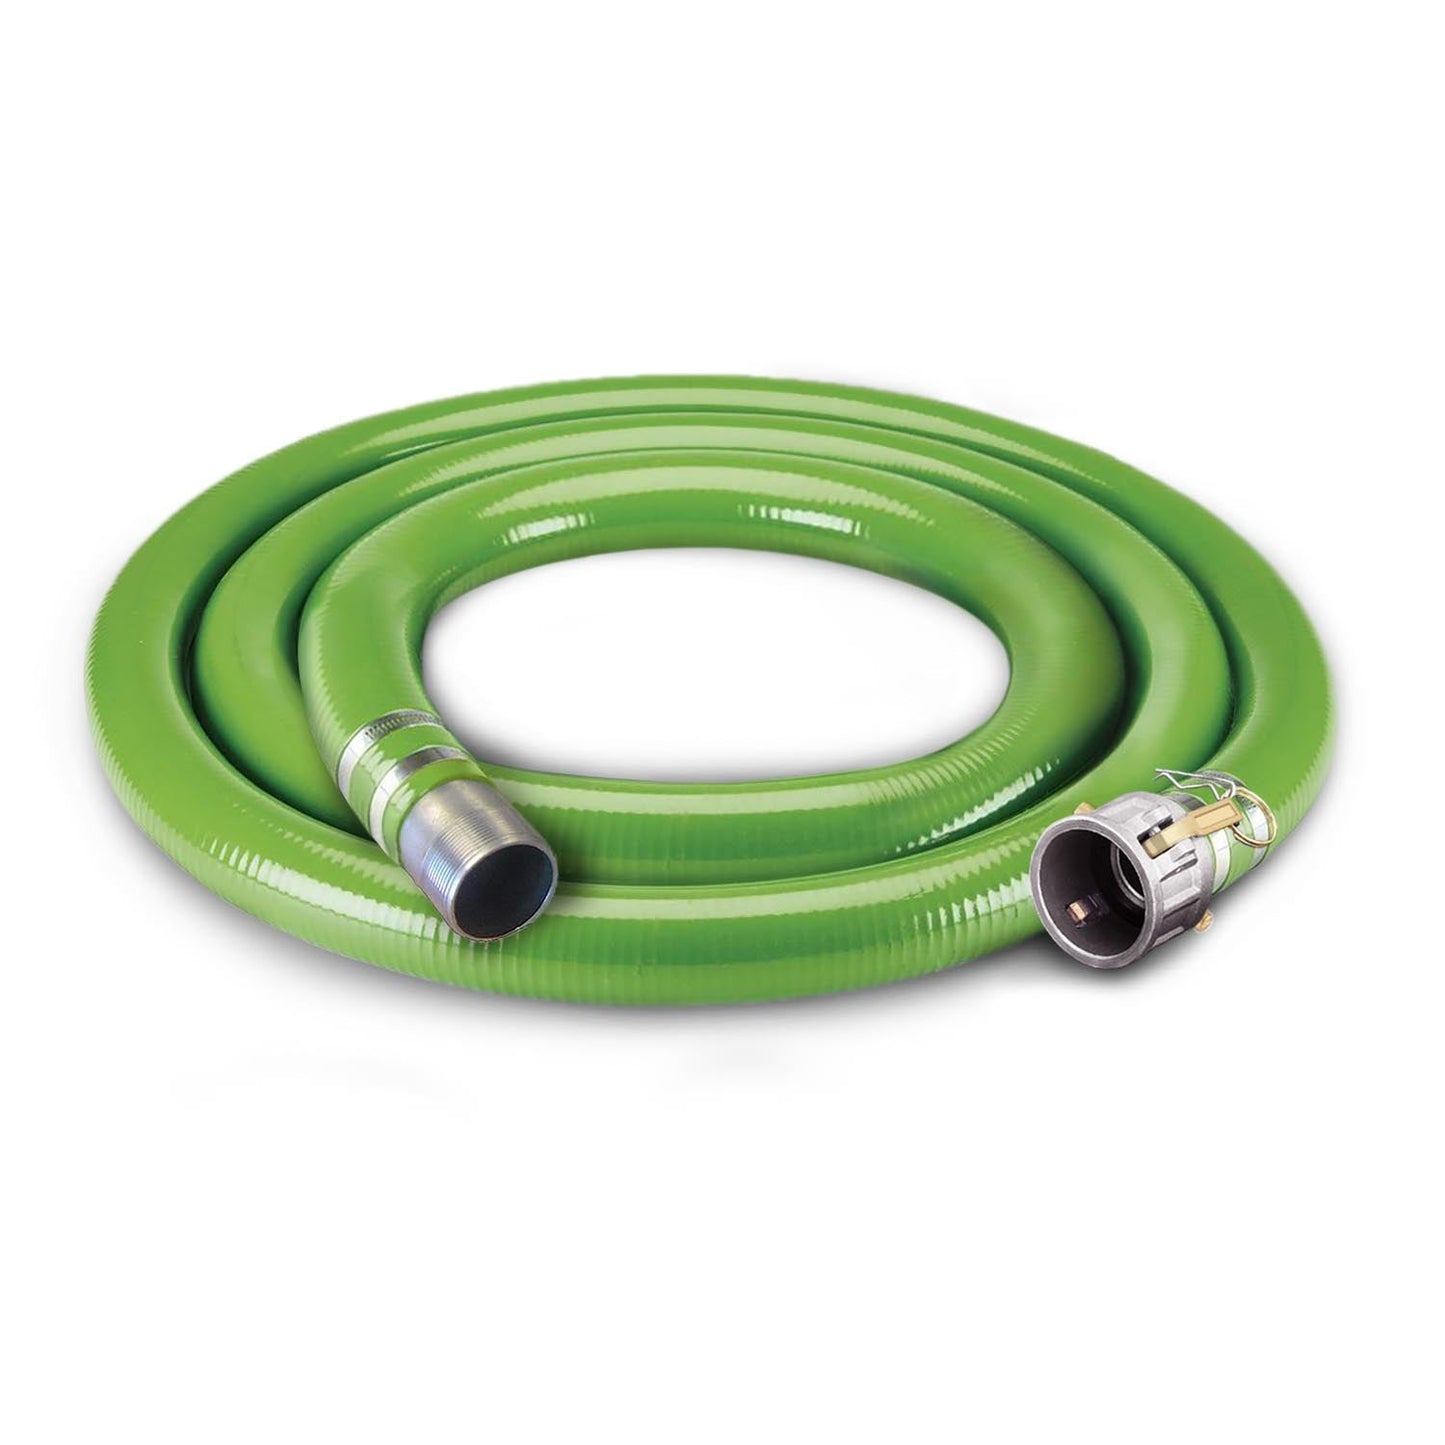 Foresee PVC 20 FT Suction Hose with Camlock Type C and MNPT Couplings